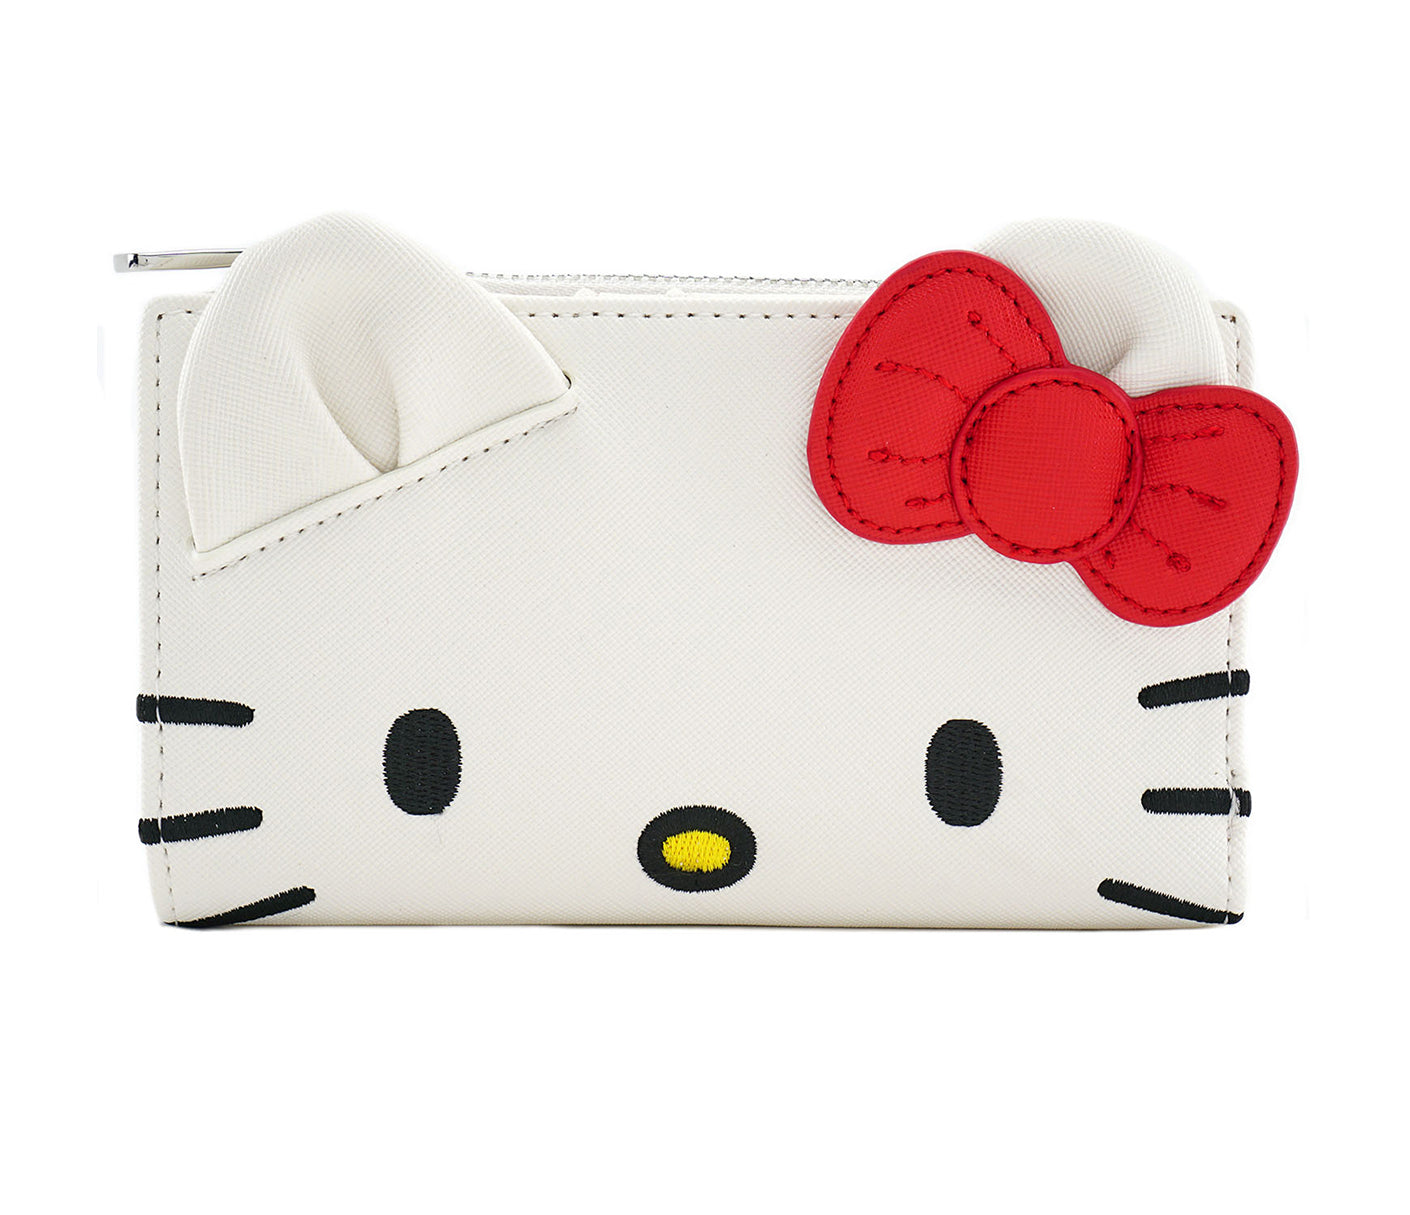 Swoon! Coming soon to Loungefly.com. The Hello Kitty﻿ Mini